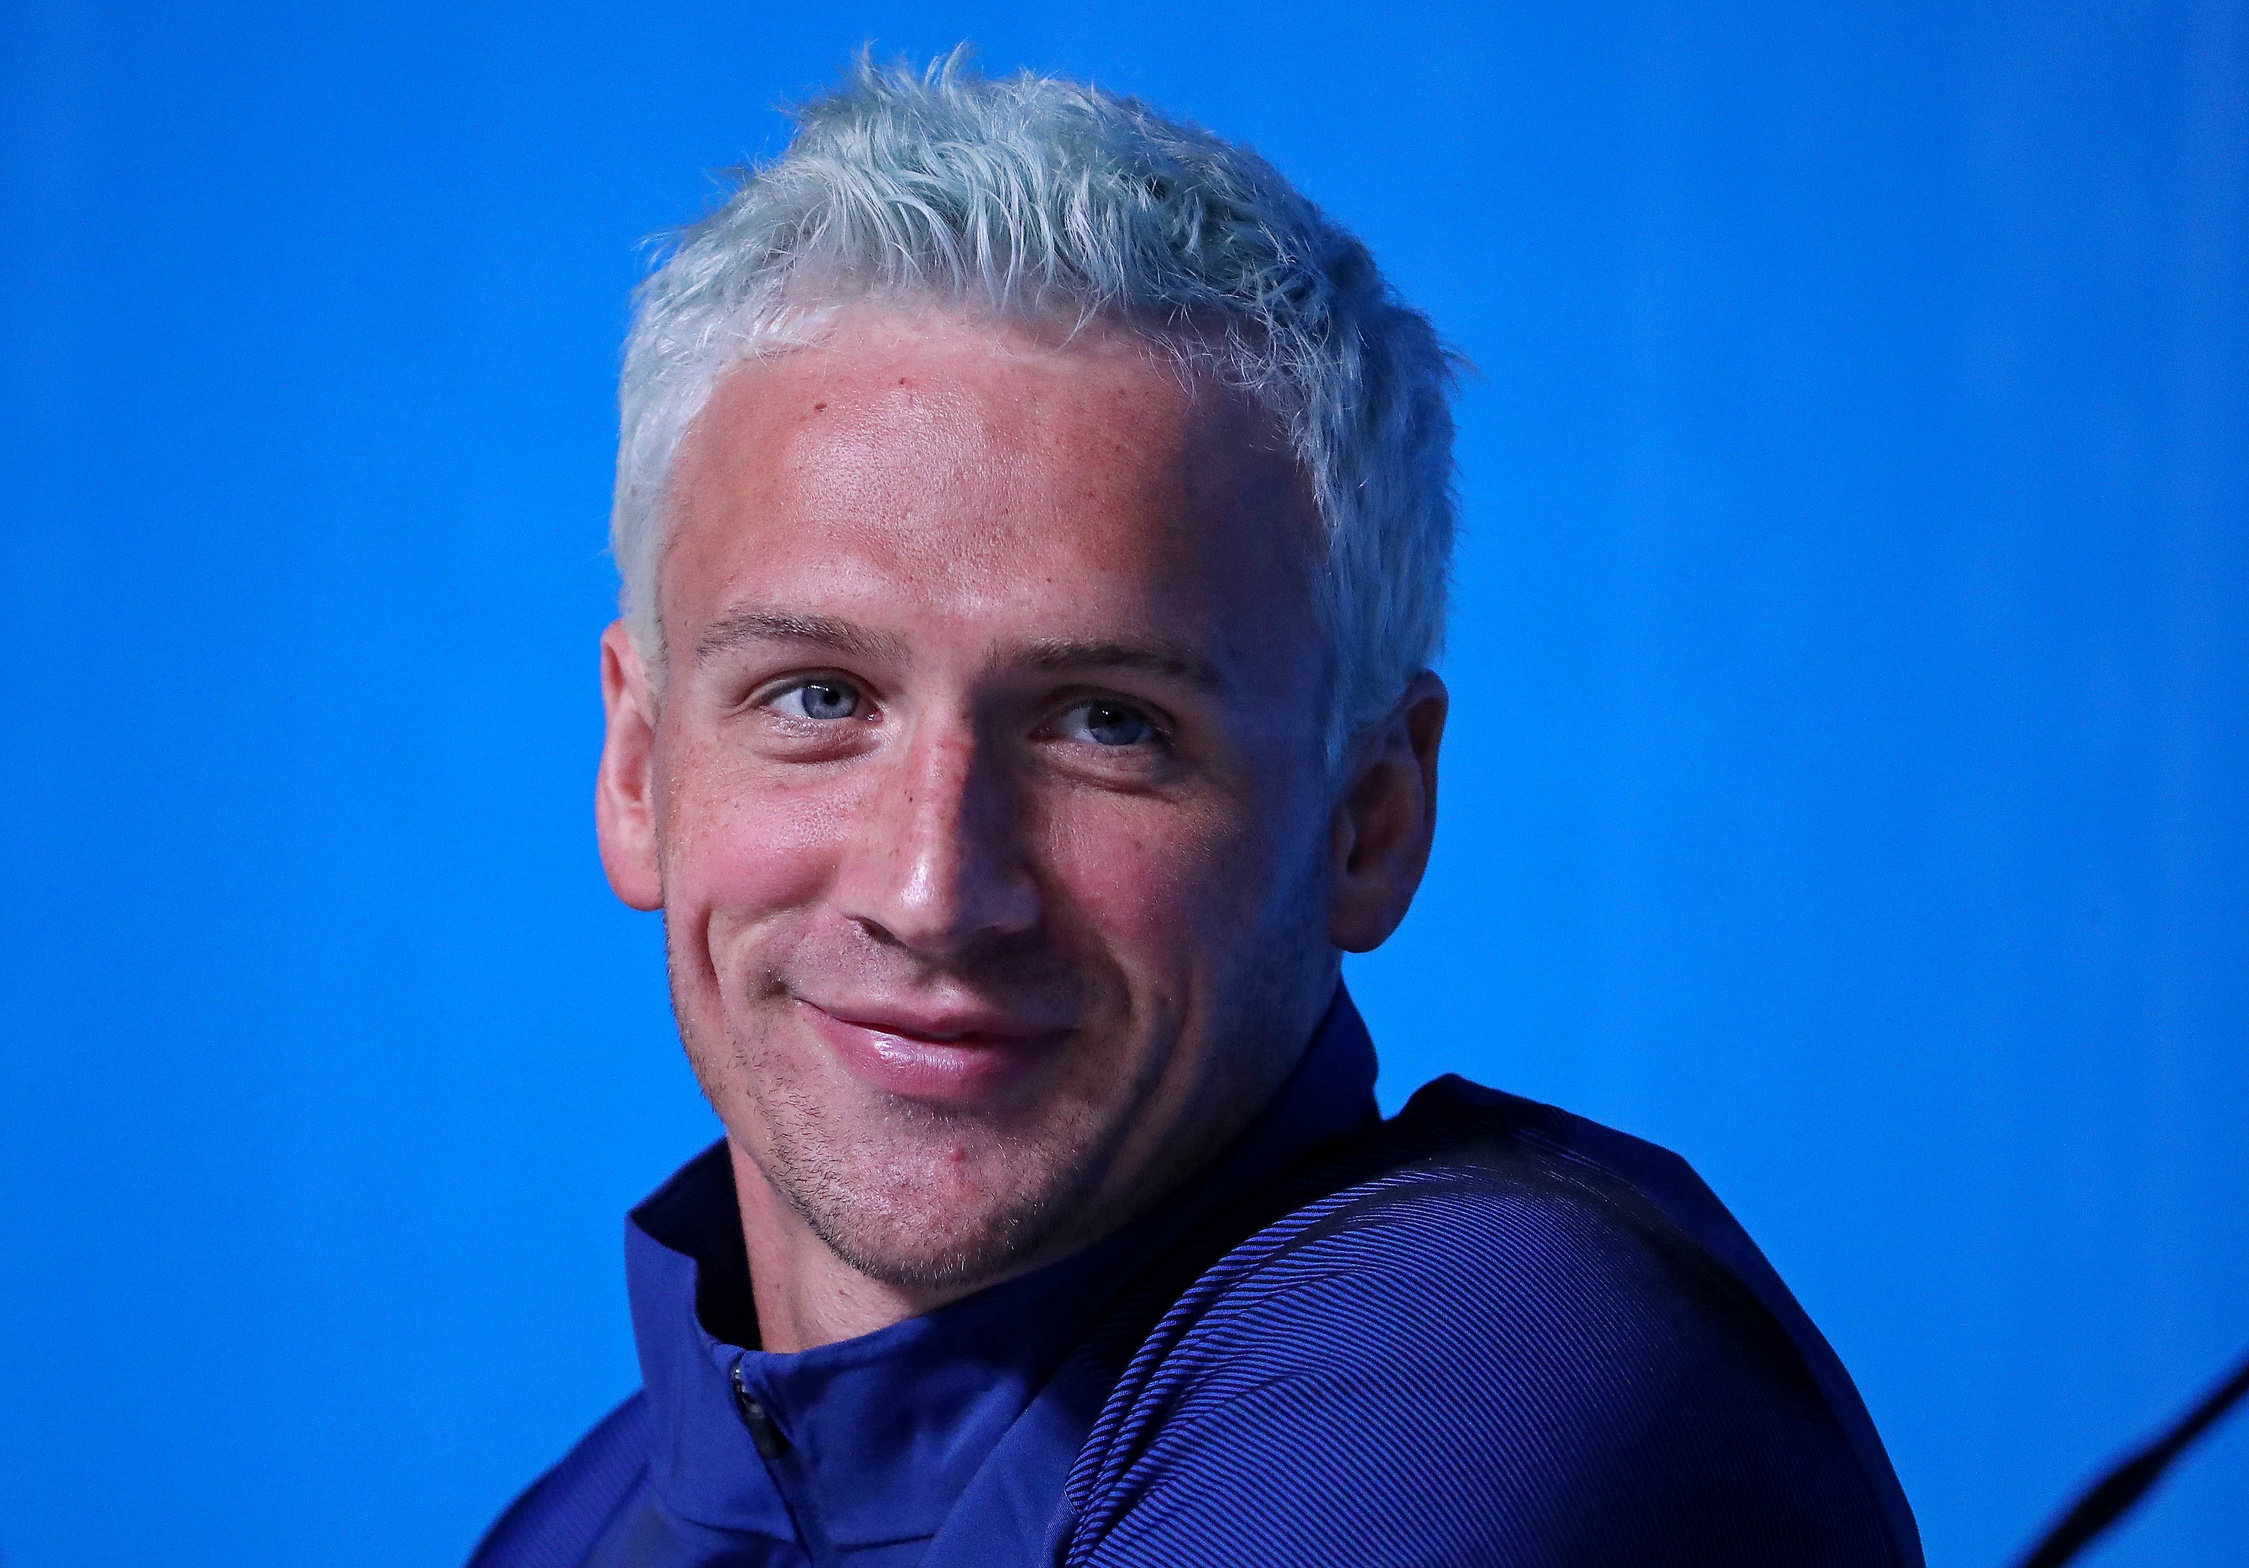 Report: Robbery Story Made Up, Ryan Lochte and Friends May Have Peed All Over that Gas Station